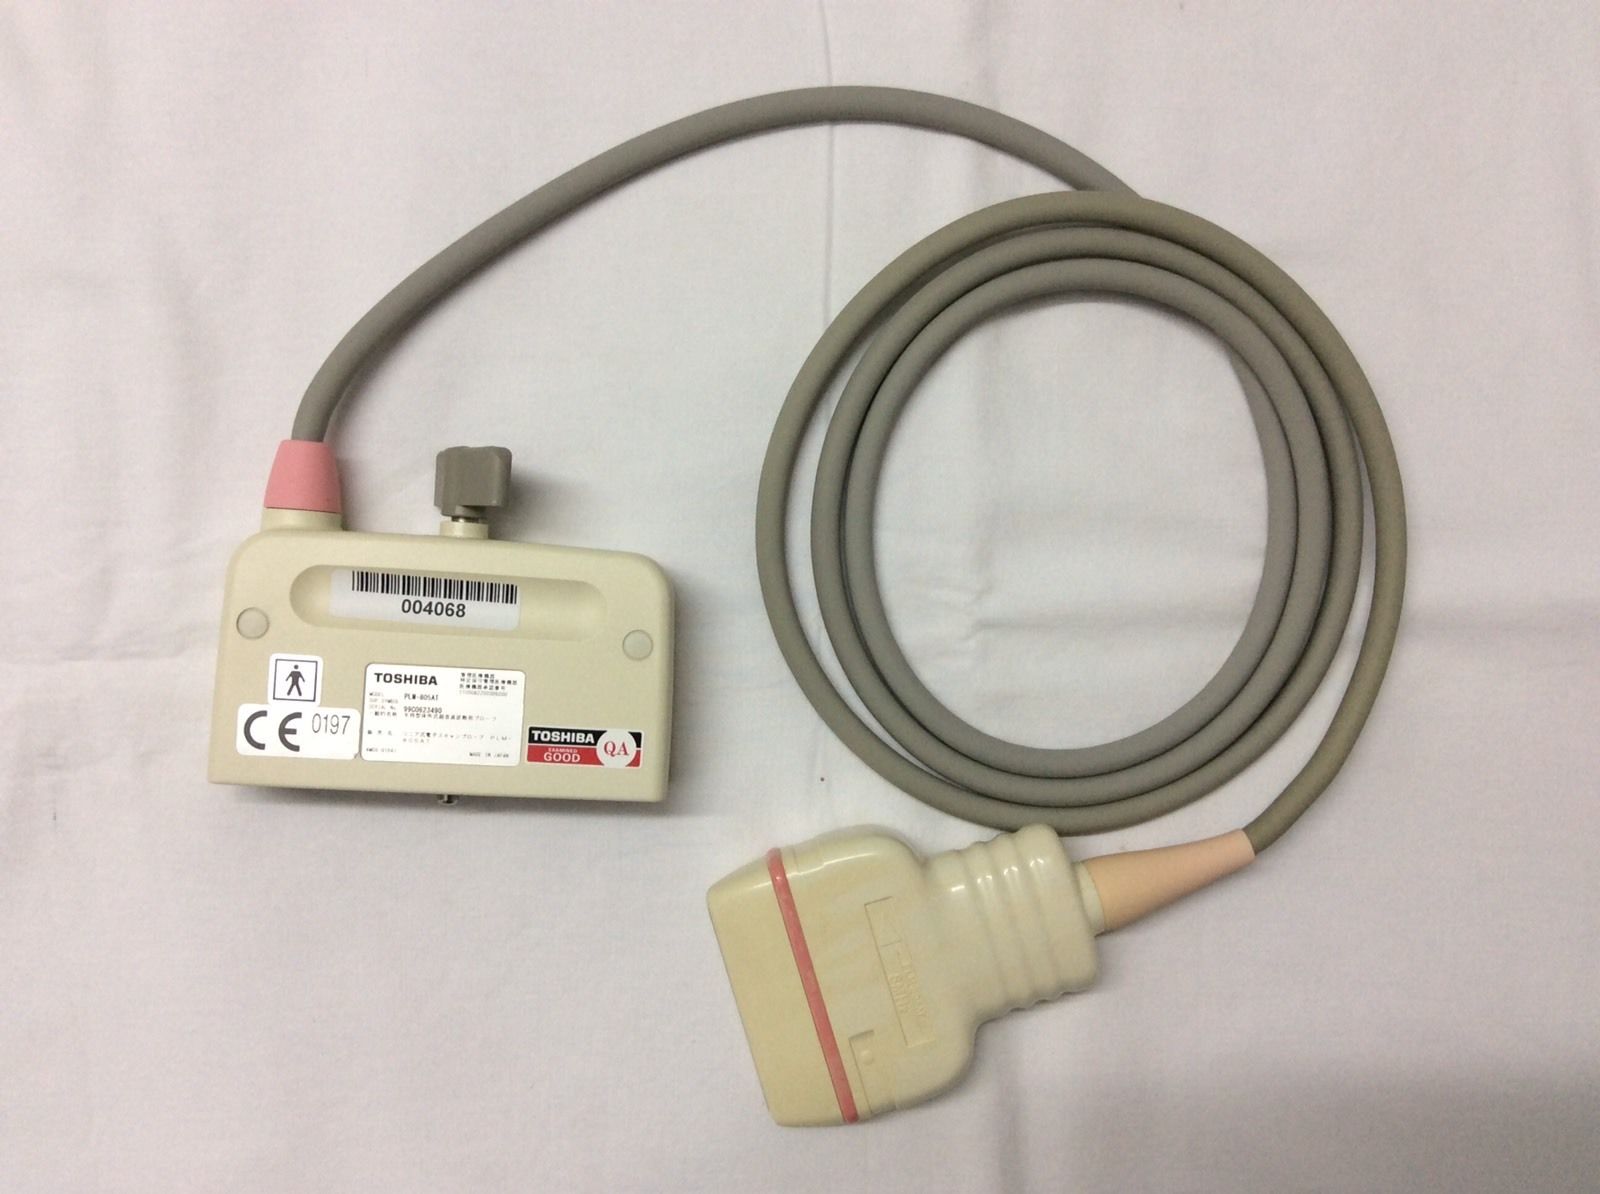 Toshiba Ultrasound transducer probe linear PLM-805AT DIAGNOSTIC ULTRASOUND MACHINES FOR SALE